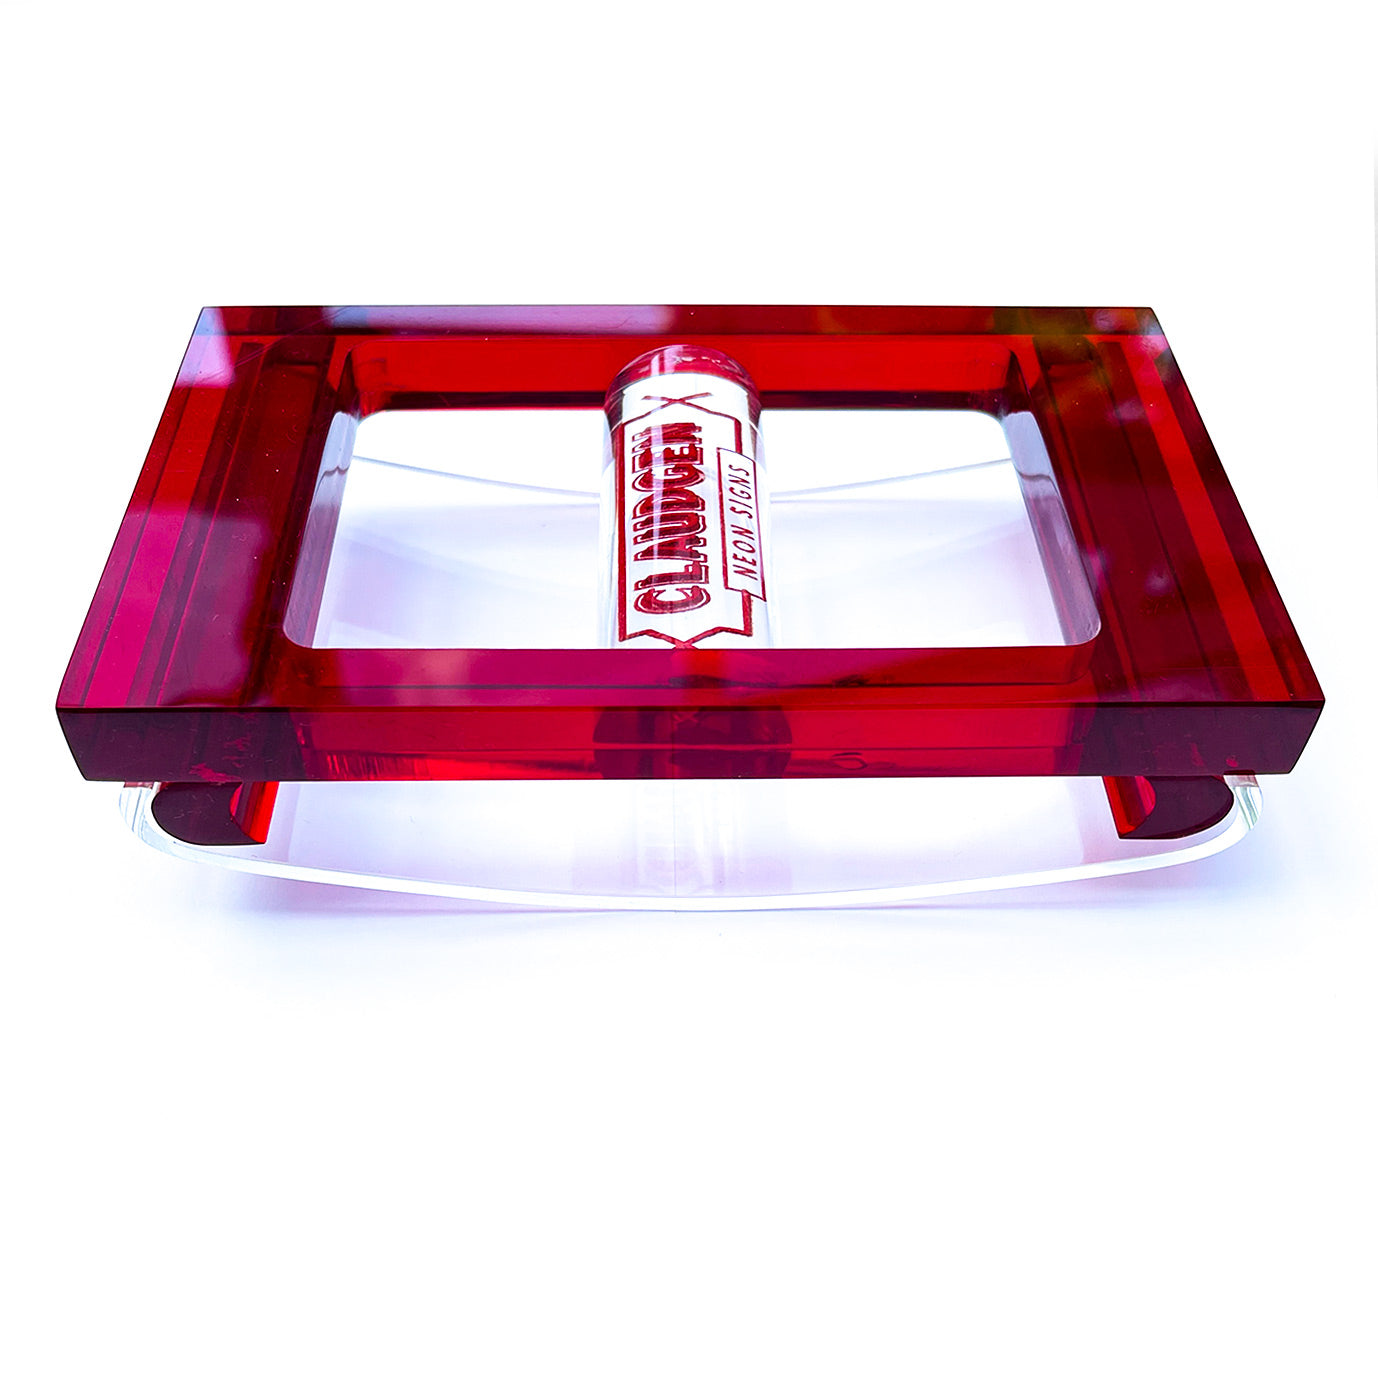 Vintage 1960s Desk Ink Blotter from the sign company Claudgen Neon Signs, in a red and clear perspex - SHOP NOW - www.intovintage.co.uk